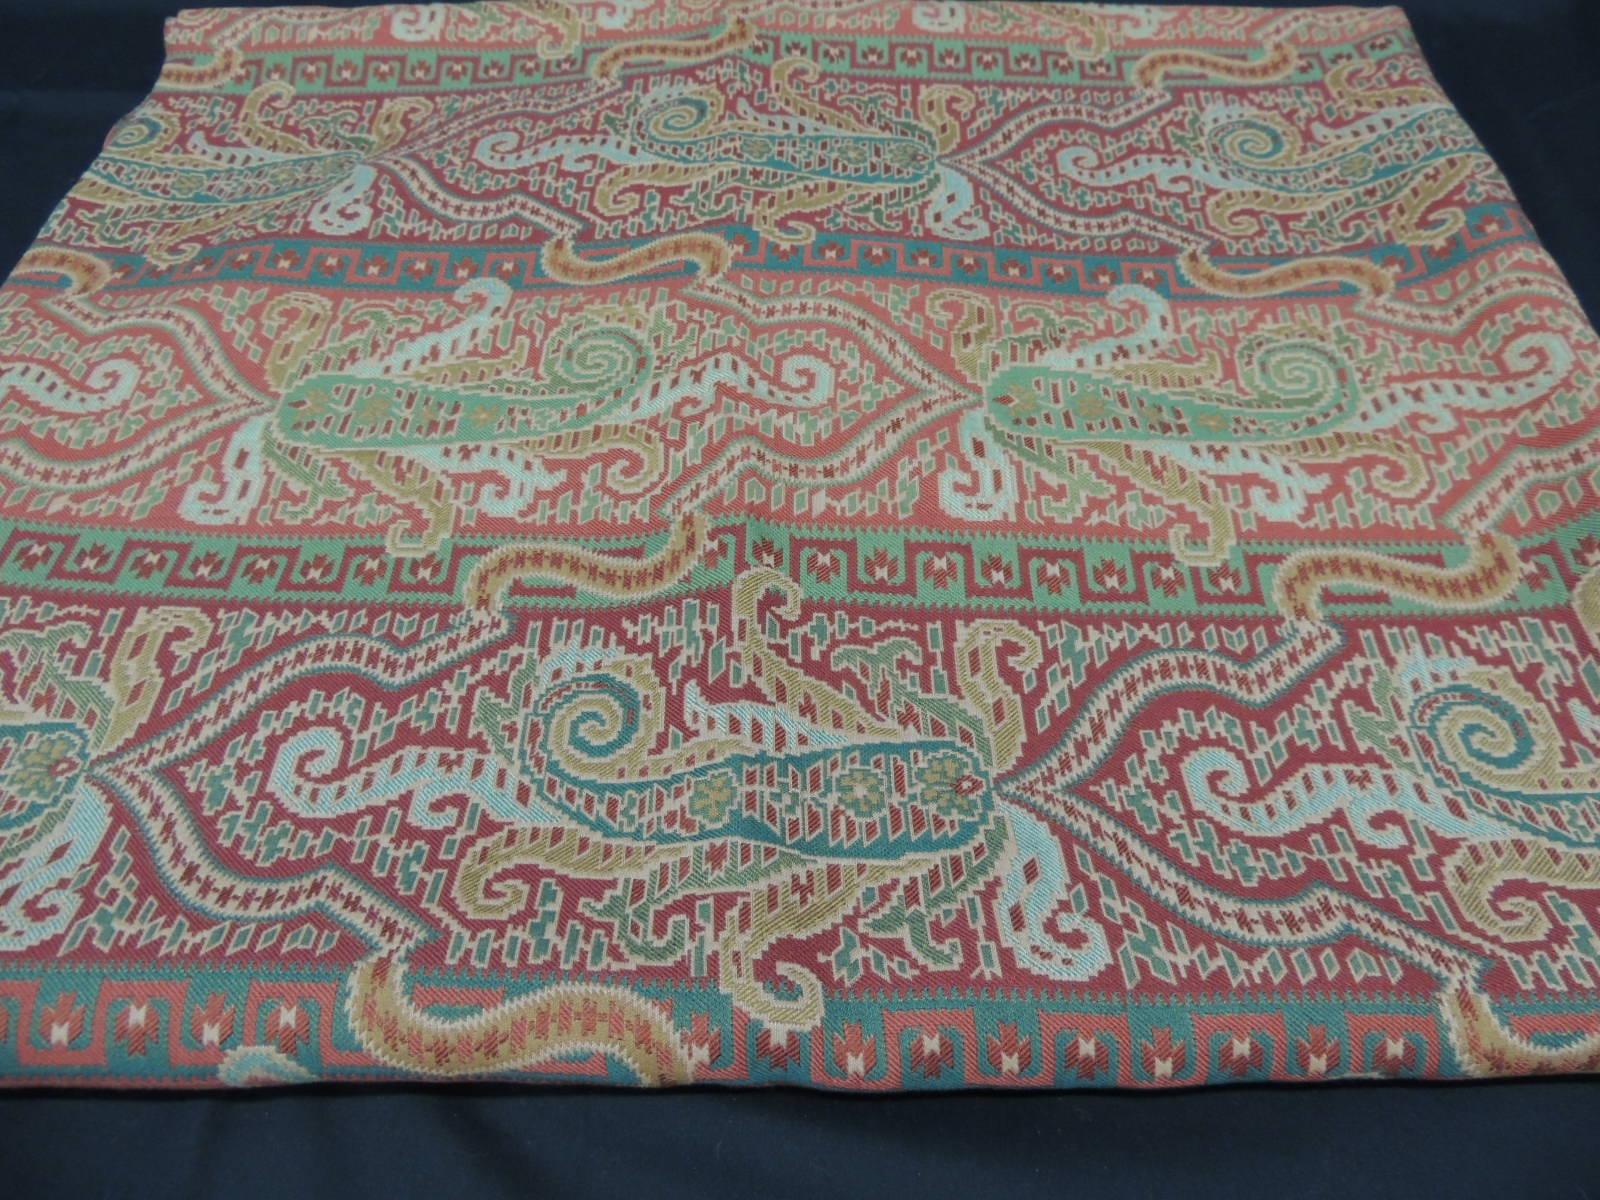 Woven Red and Green Brunschwig & Fils Paisley Woven Fabric.
Ideal for upholstery and pillows.
50.5